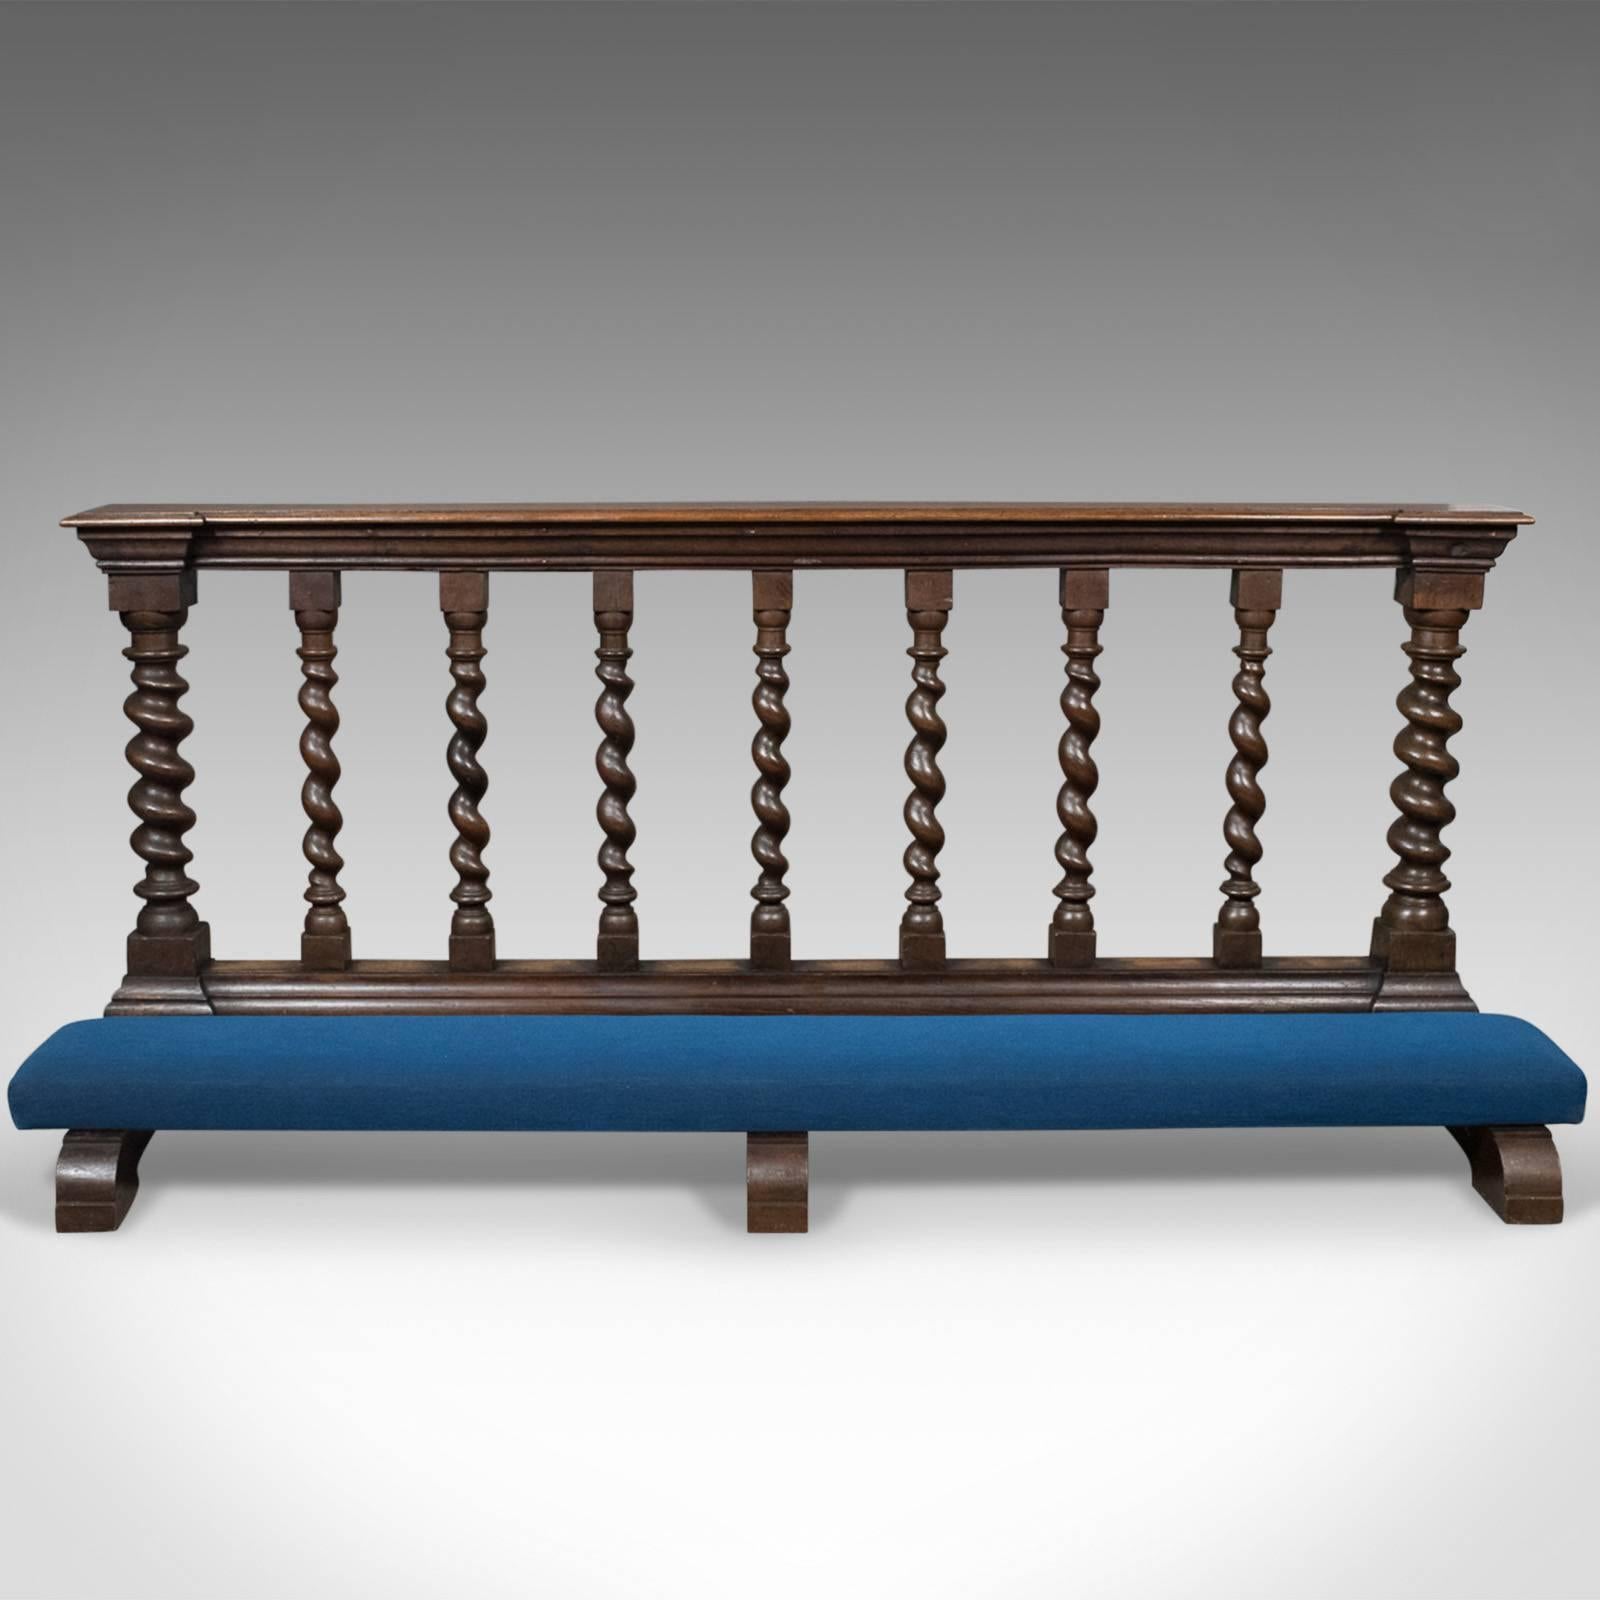 This is an antique communion rail in English oak dating to the Victorian period, circa 1900.

Appealing dark oak tones with desirable aged patina
Robust construction, solid and stabile

A pair of quality, stout barley twist baluster